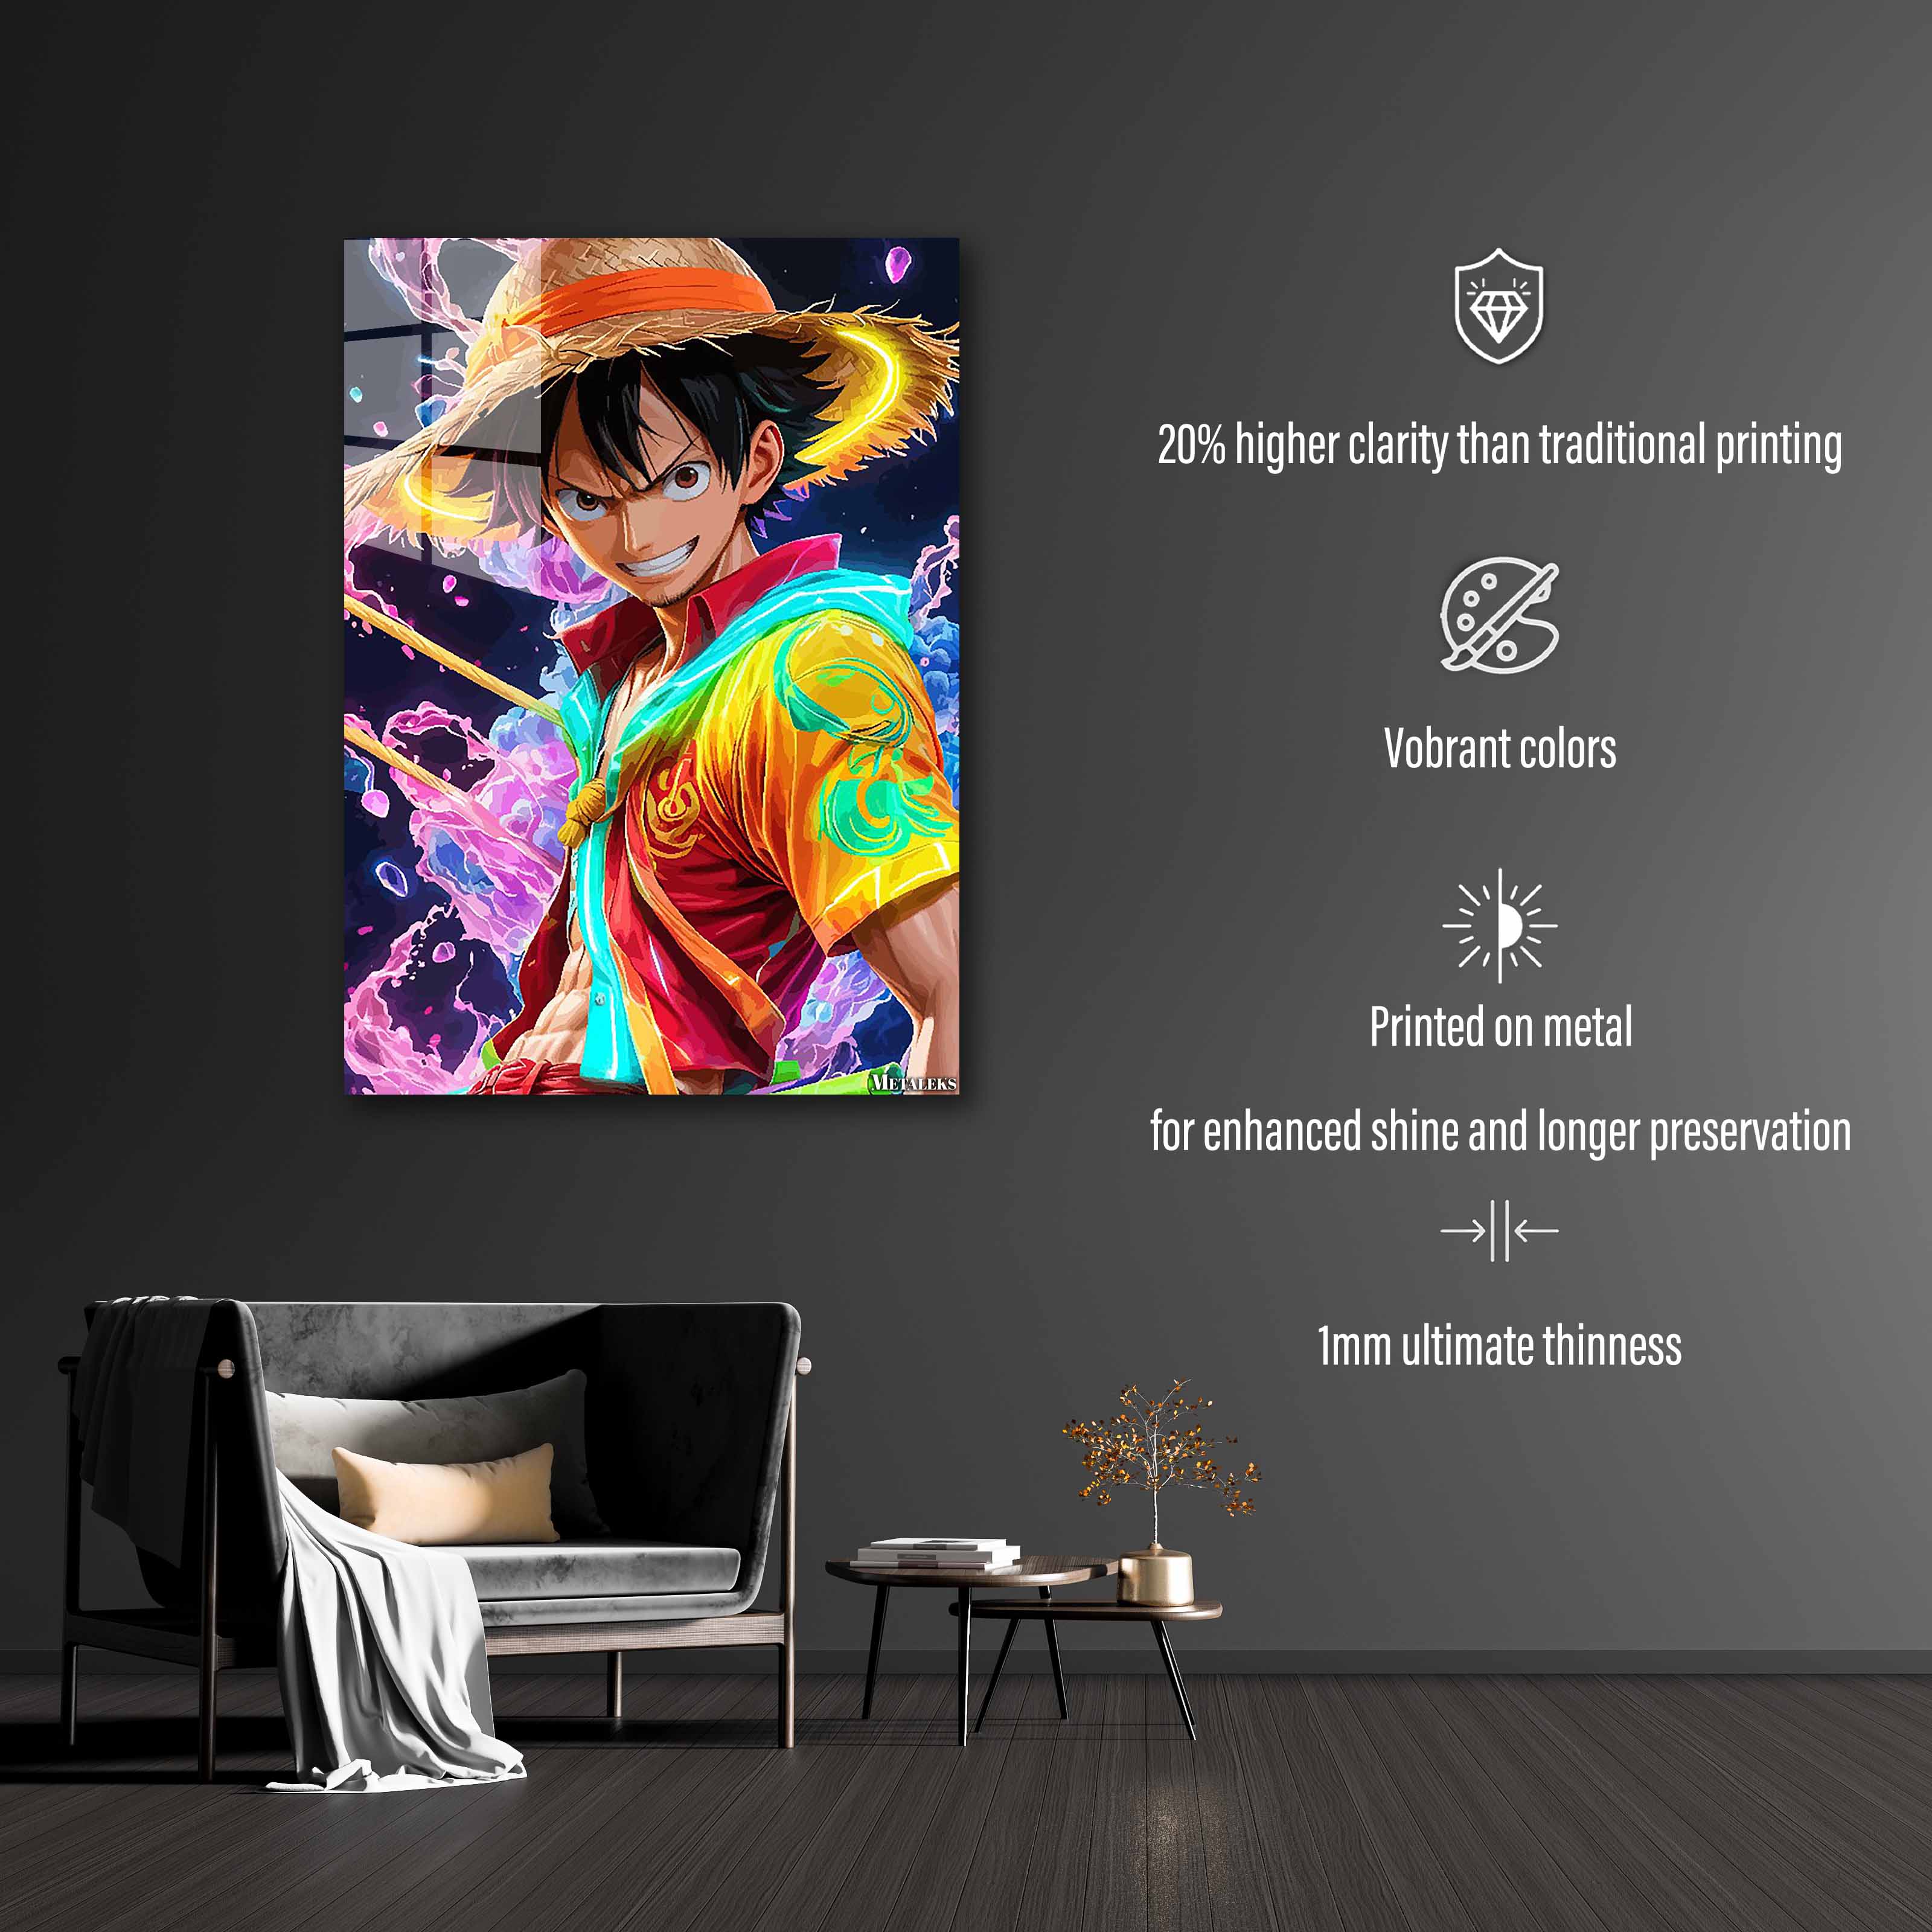 Monkey d luffy colorful theme-designed by @Sheshh